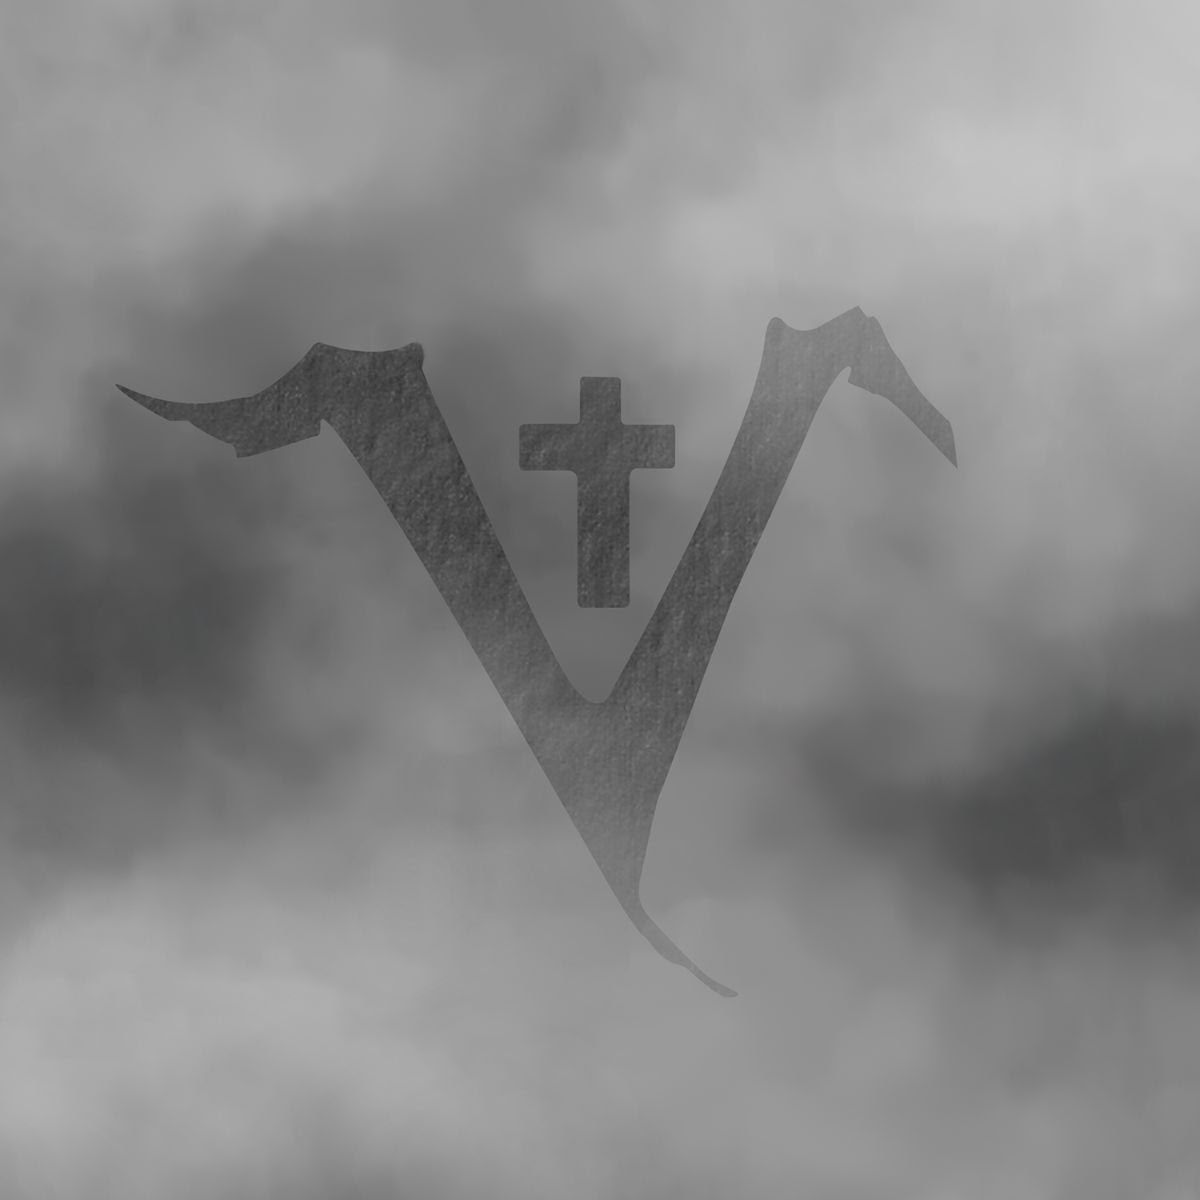 Saint Vitus streaming new song “Bloodshed”